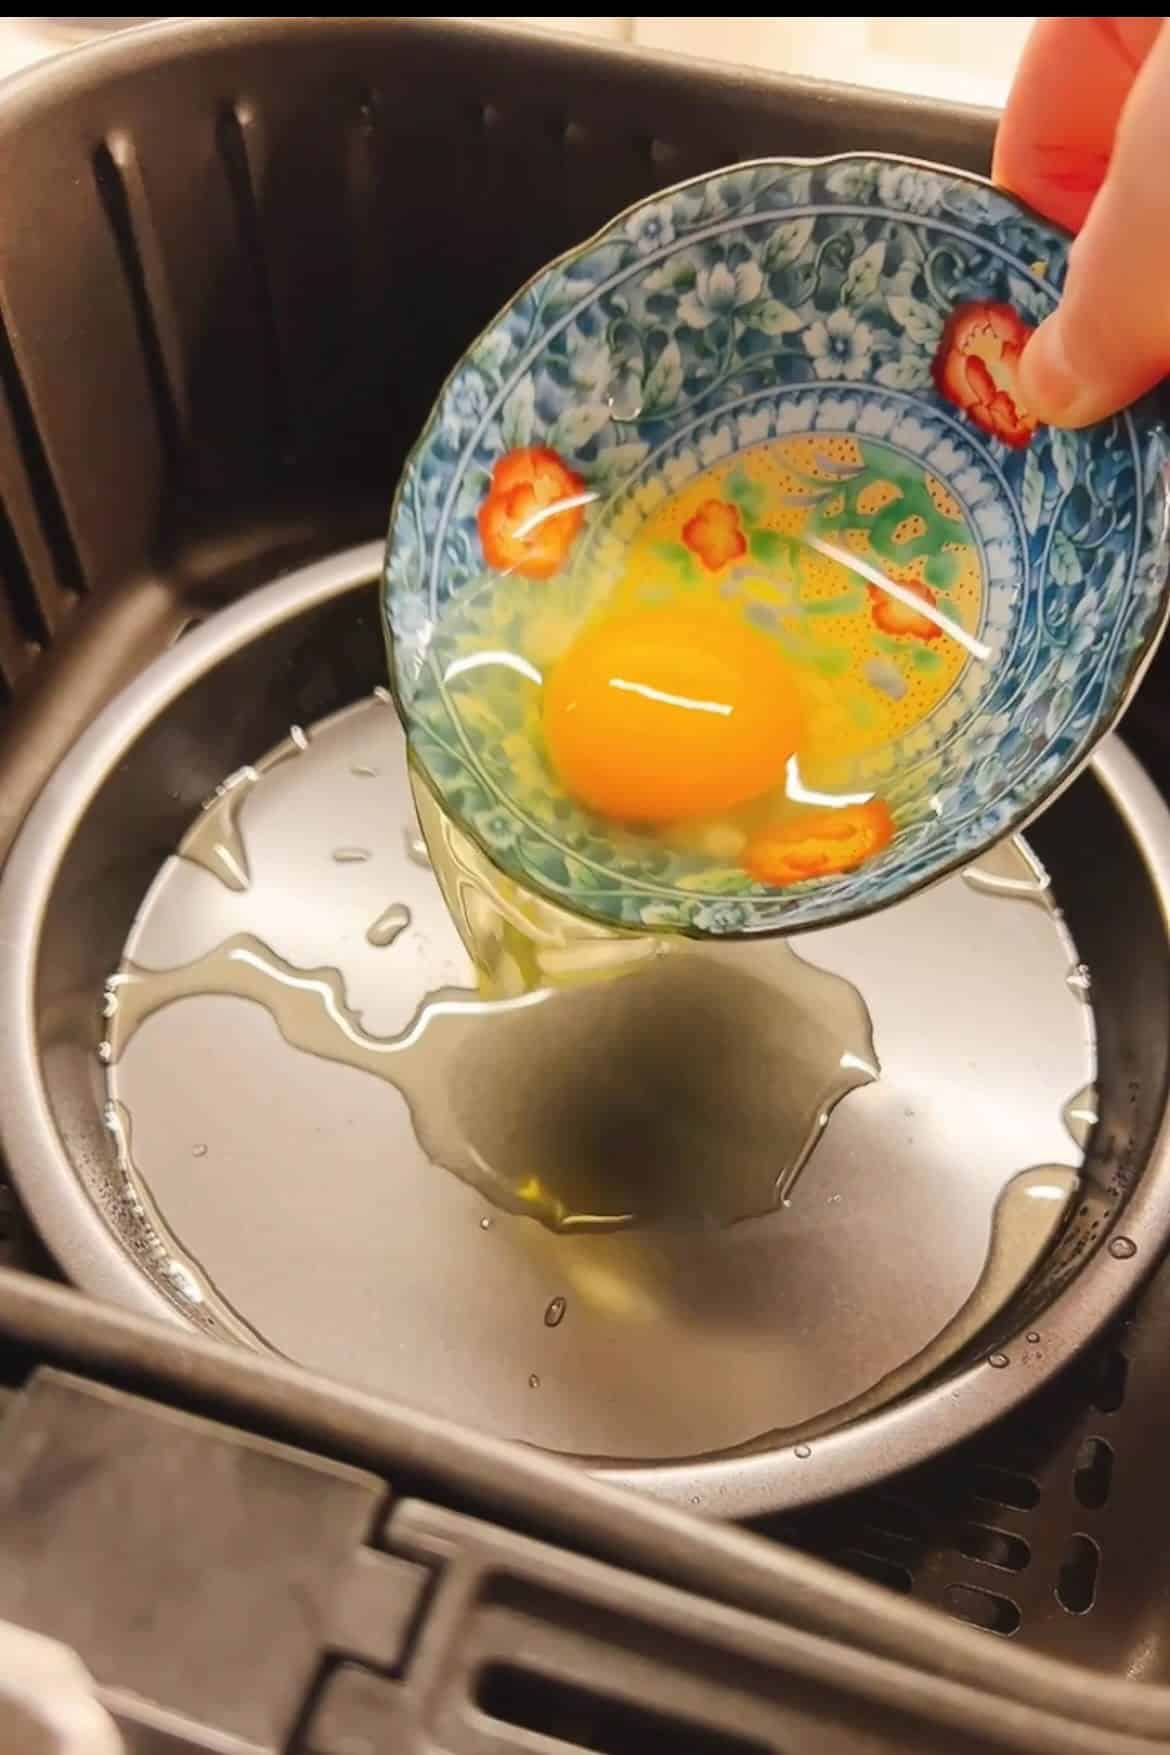 https://iheartumami.com/wp-content/uploads/2023/07/How-long-to-cook-crispy-fried-egg-in-a-pan-in-air-fryer-3.jpg